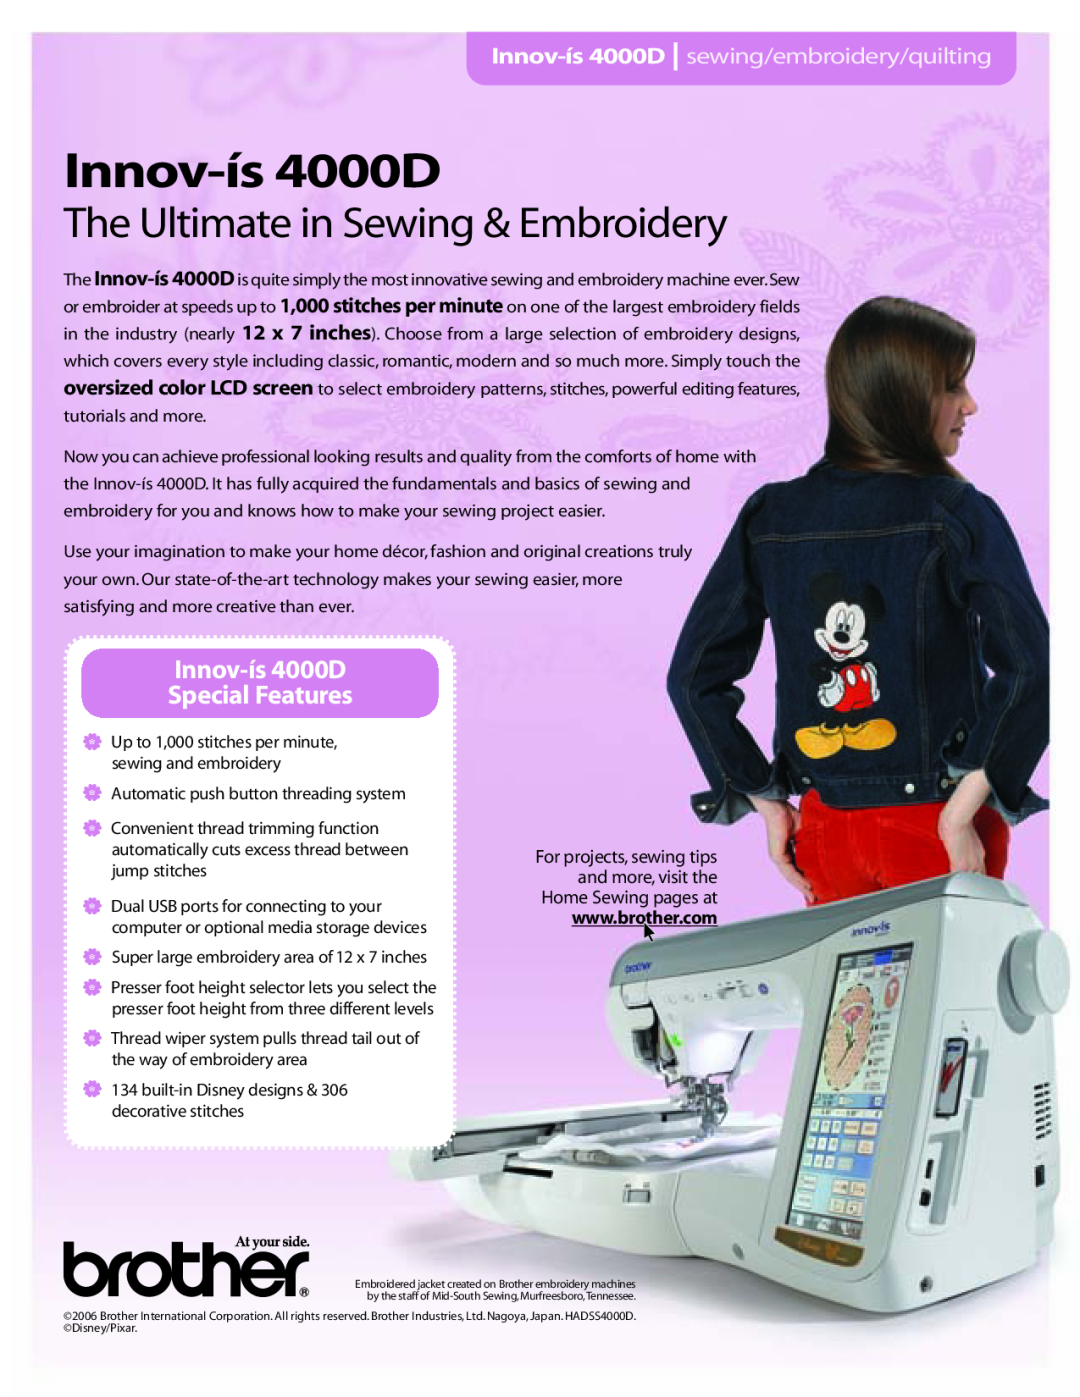 Brother manual Innov-ís 4000D sewing/embroidery/quilting, The Ultimate in Sewing & Embroidery 